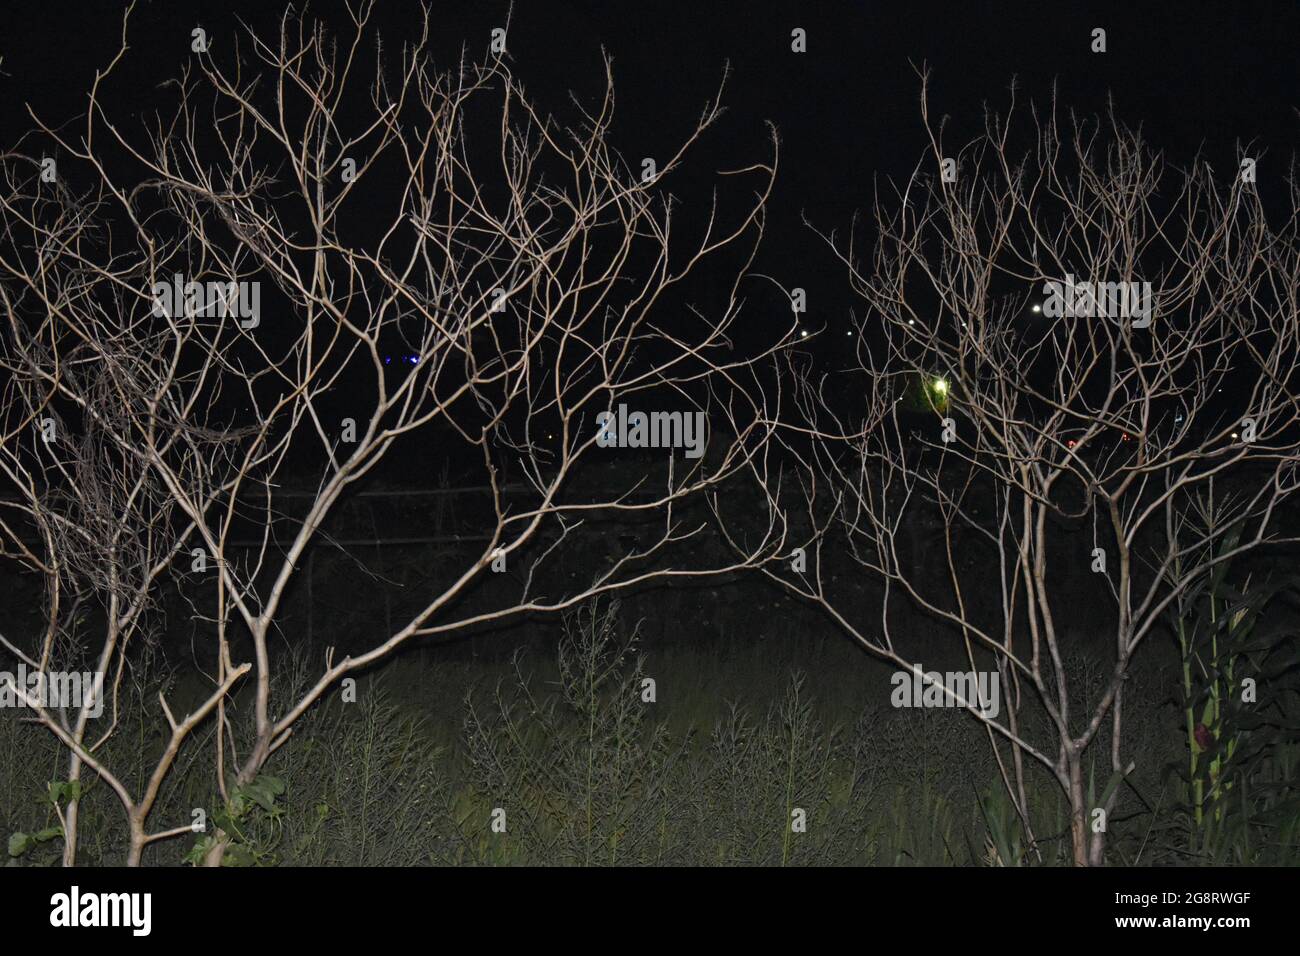 Trees without leaves at night time. Colombo, Sri Lanka. Stock Photo